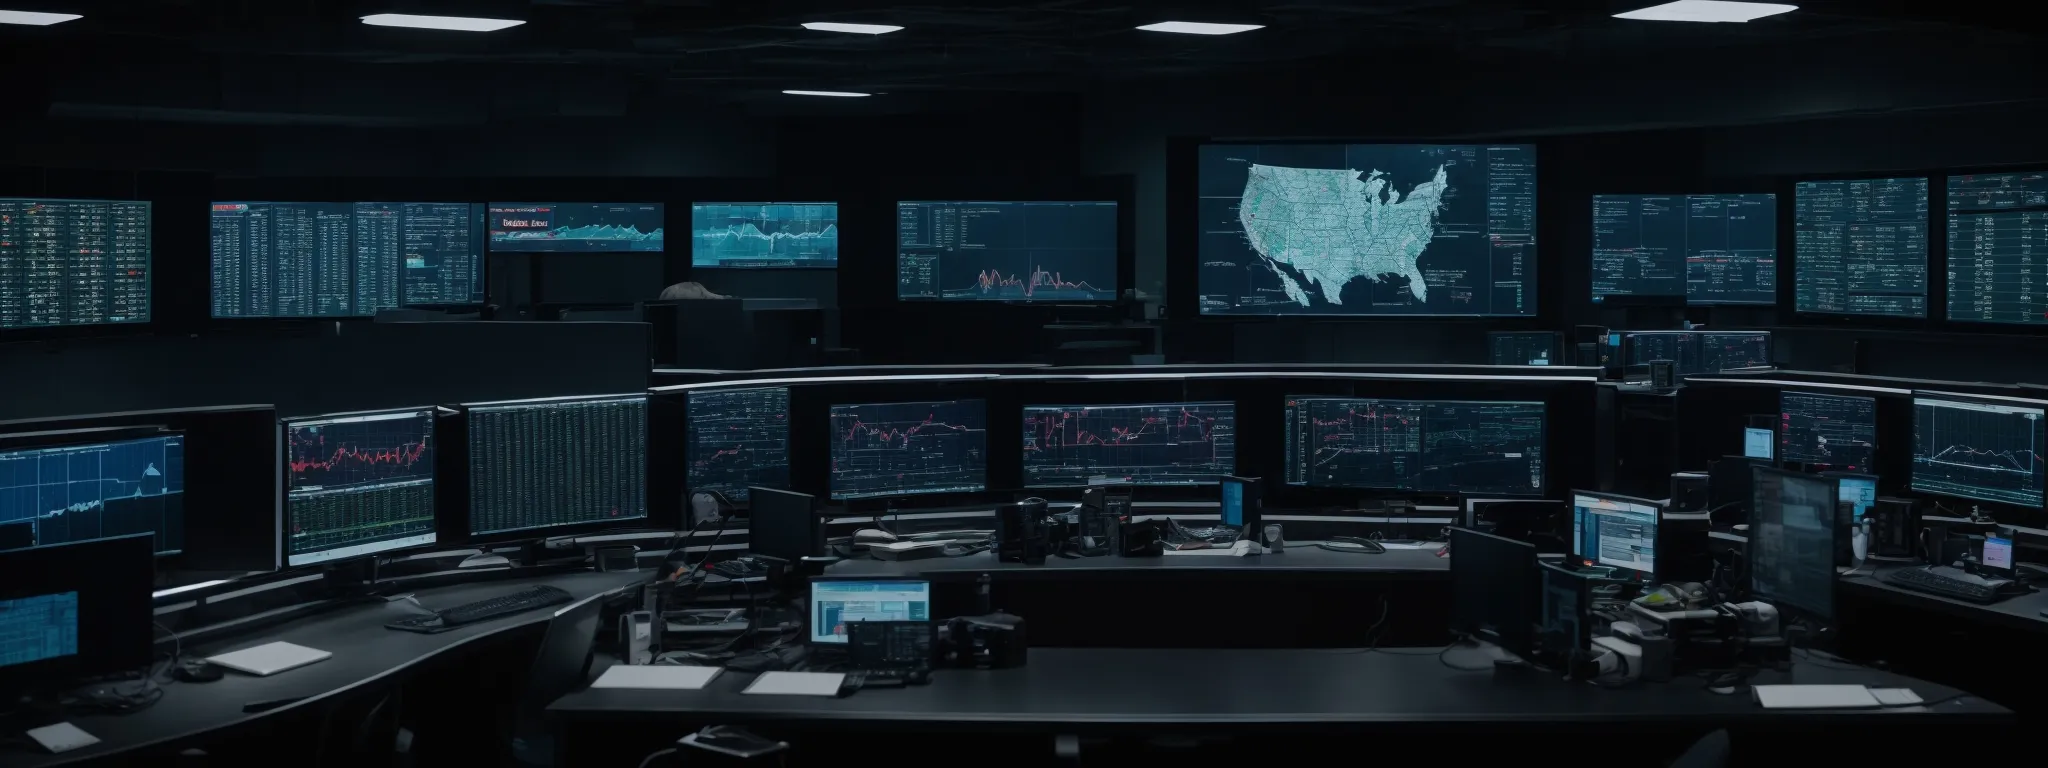 a network operations center with multiple screens displaying real-time analytics and status reports.